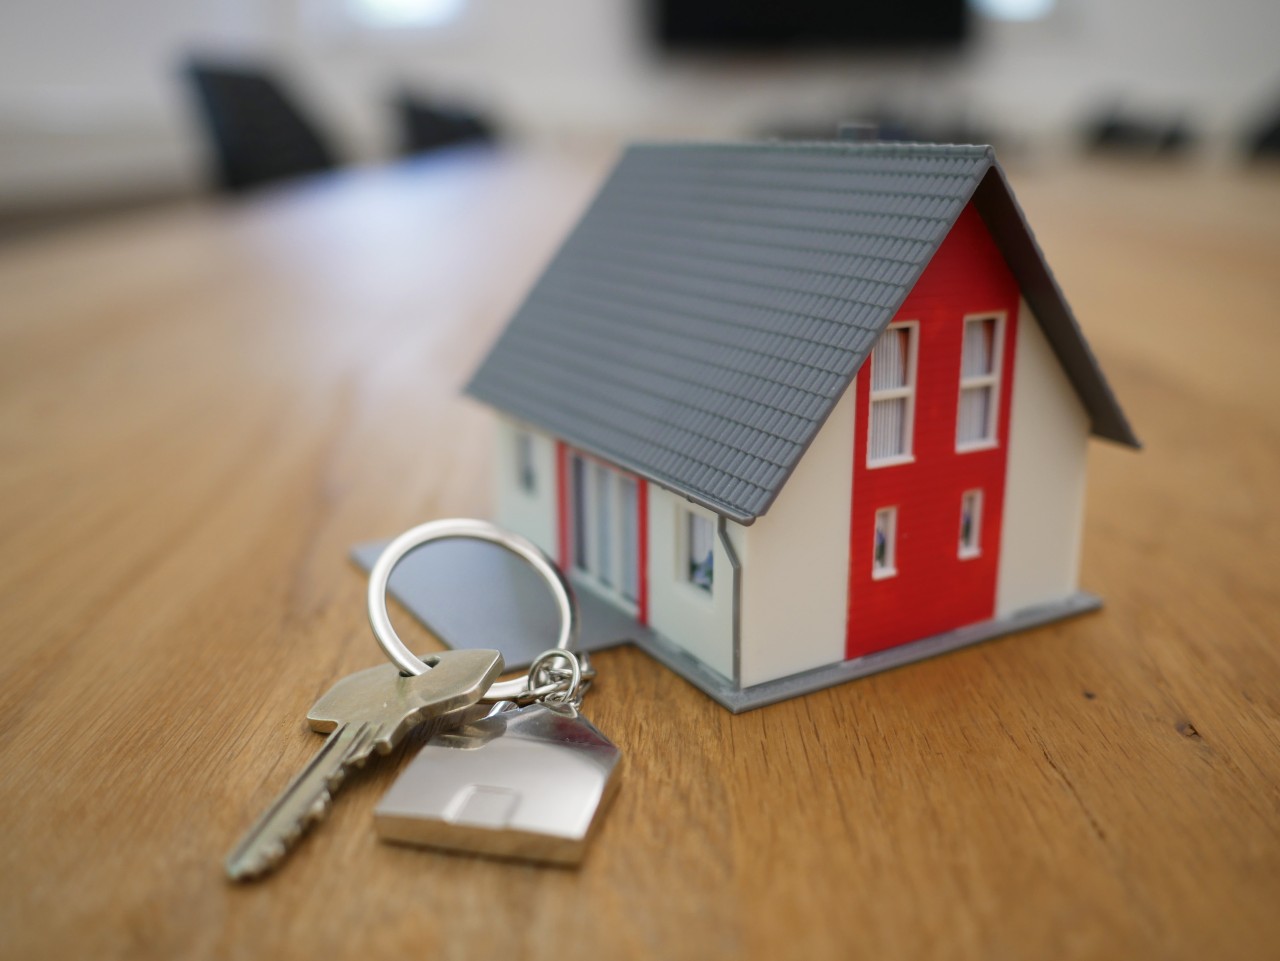 Buying An Older Property? Here Are Few Property Checks To Make